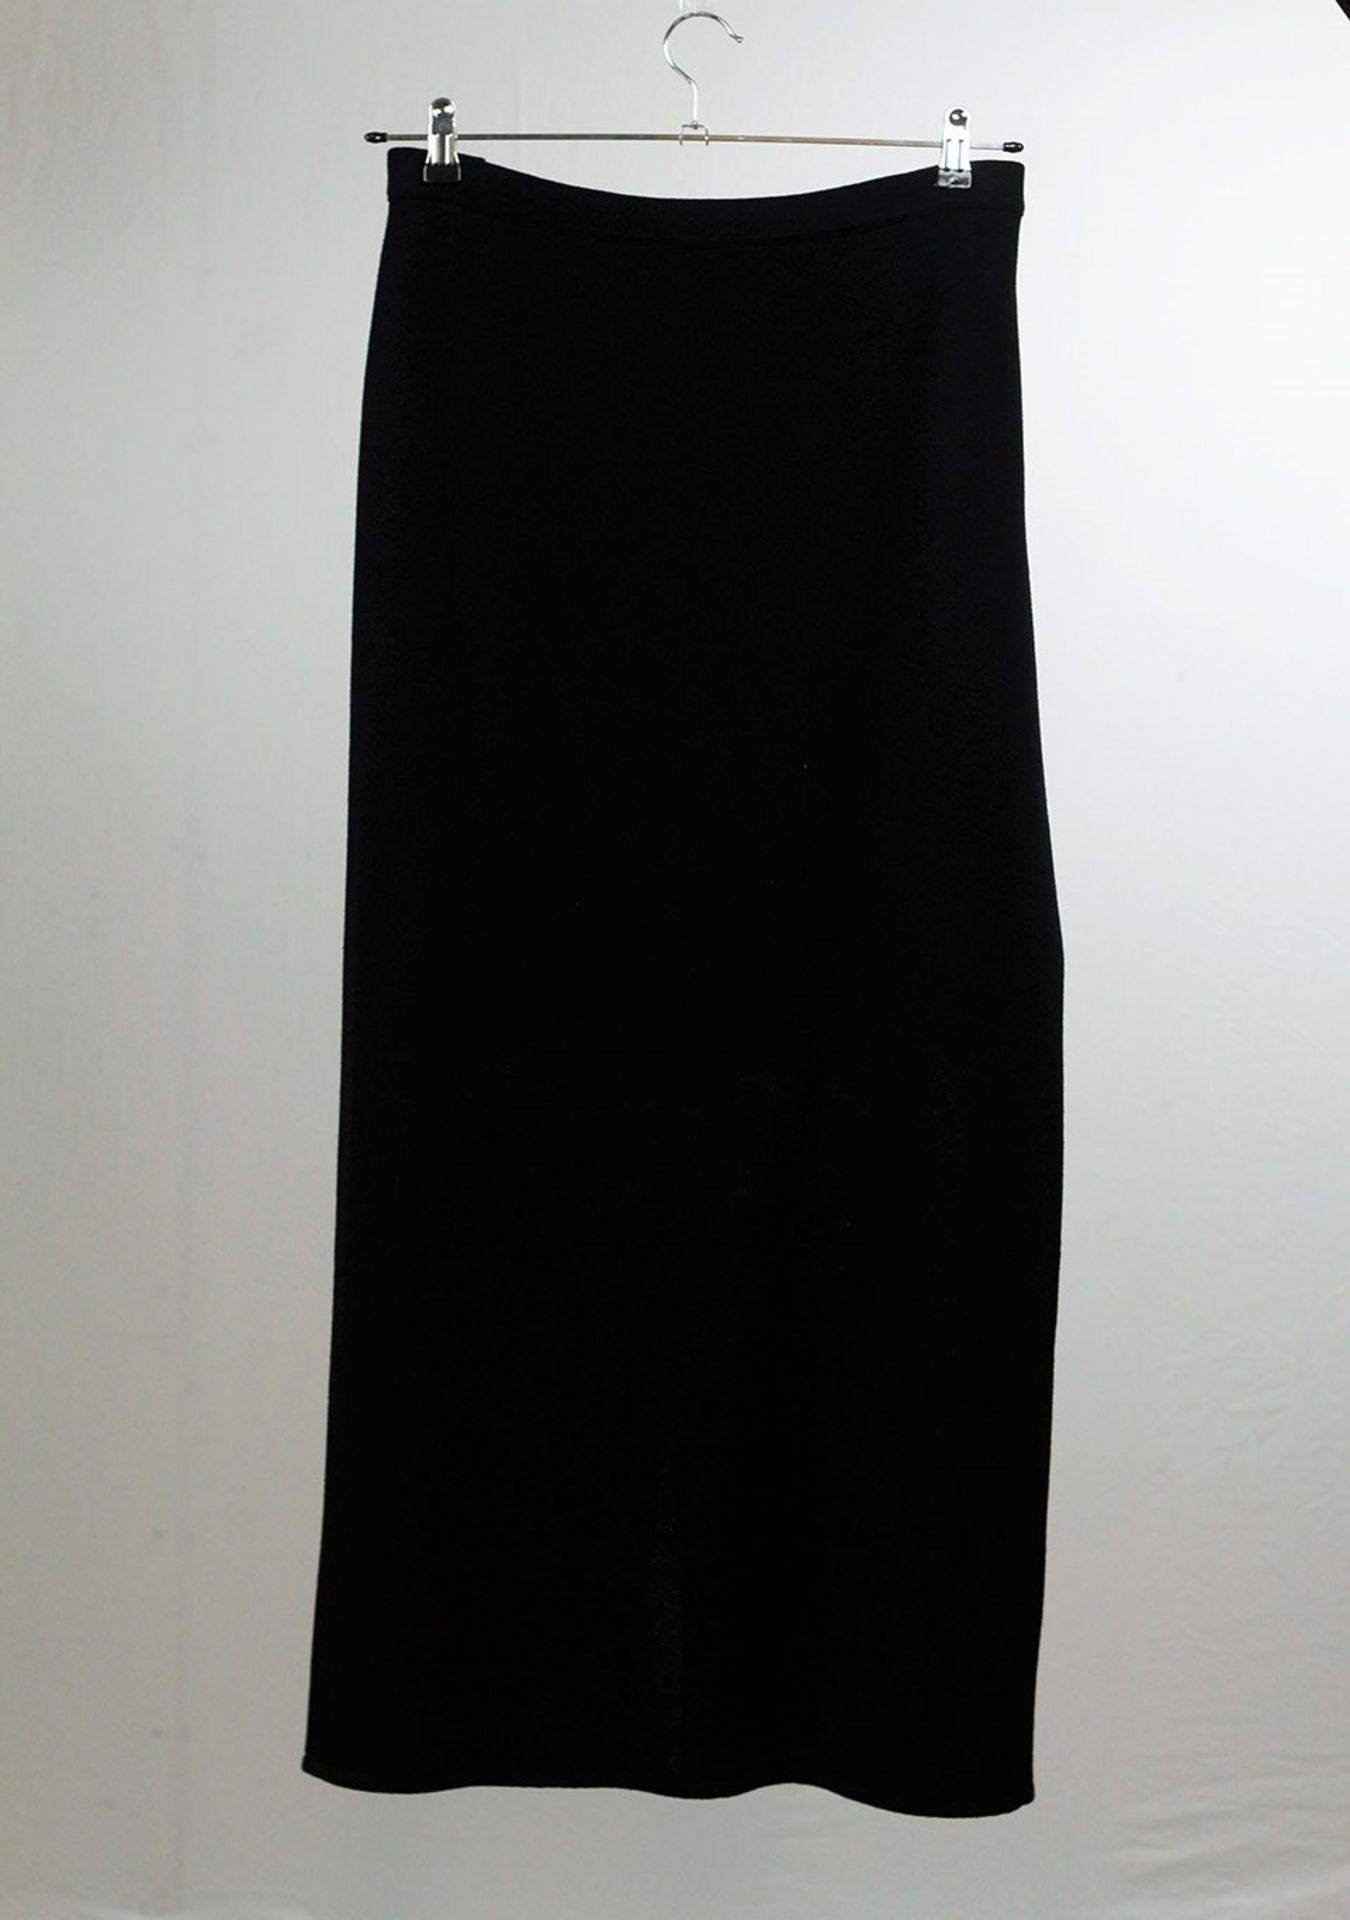 1 x Boutique Le Duc Black Black Skirt - Size: 22 - Material: 60% Acrylic 25% Wool 15% Nylon. - Image 2 of 6